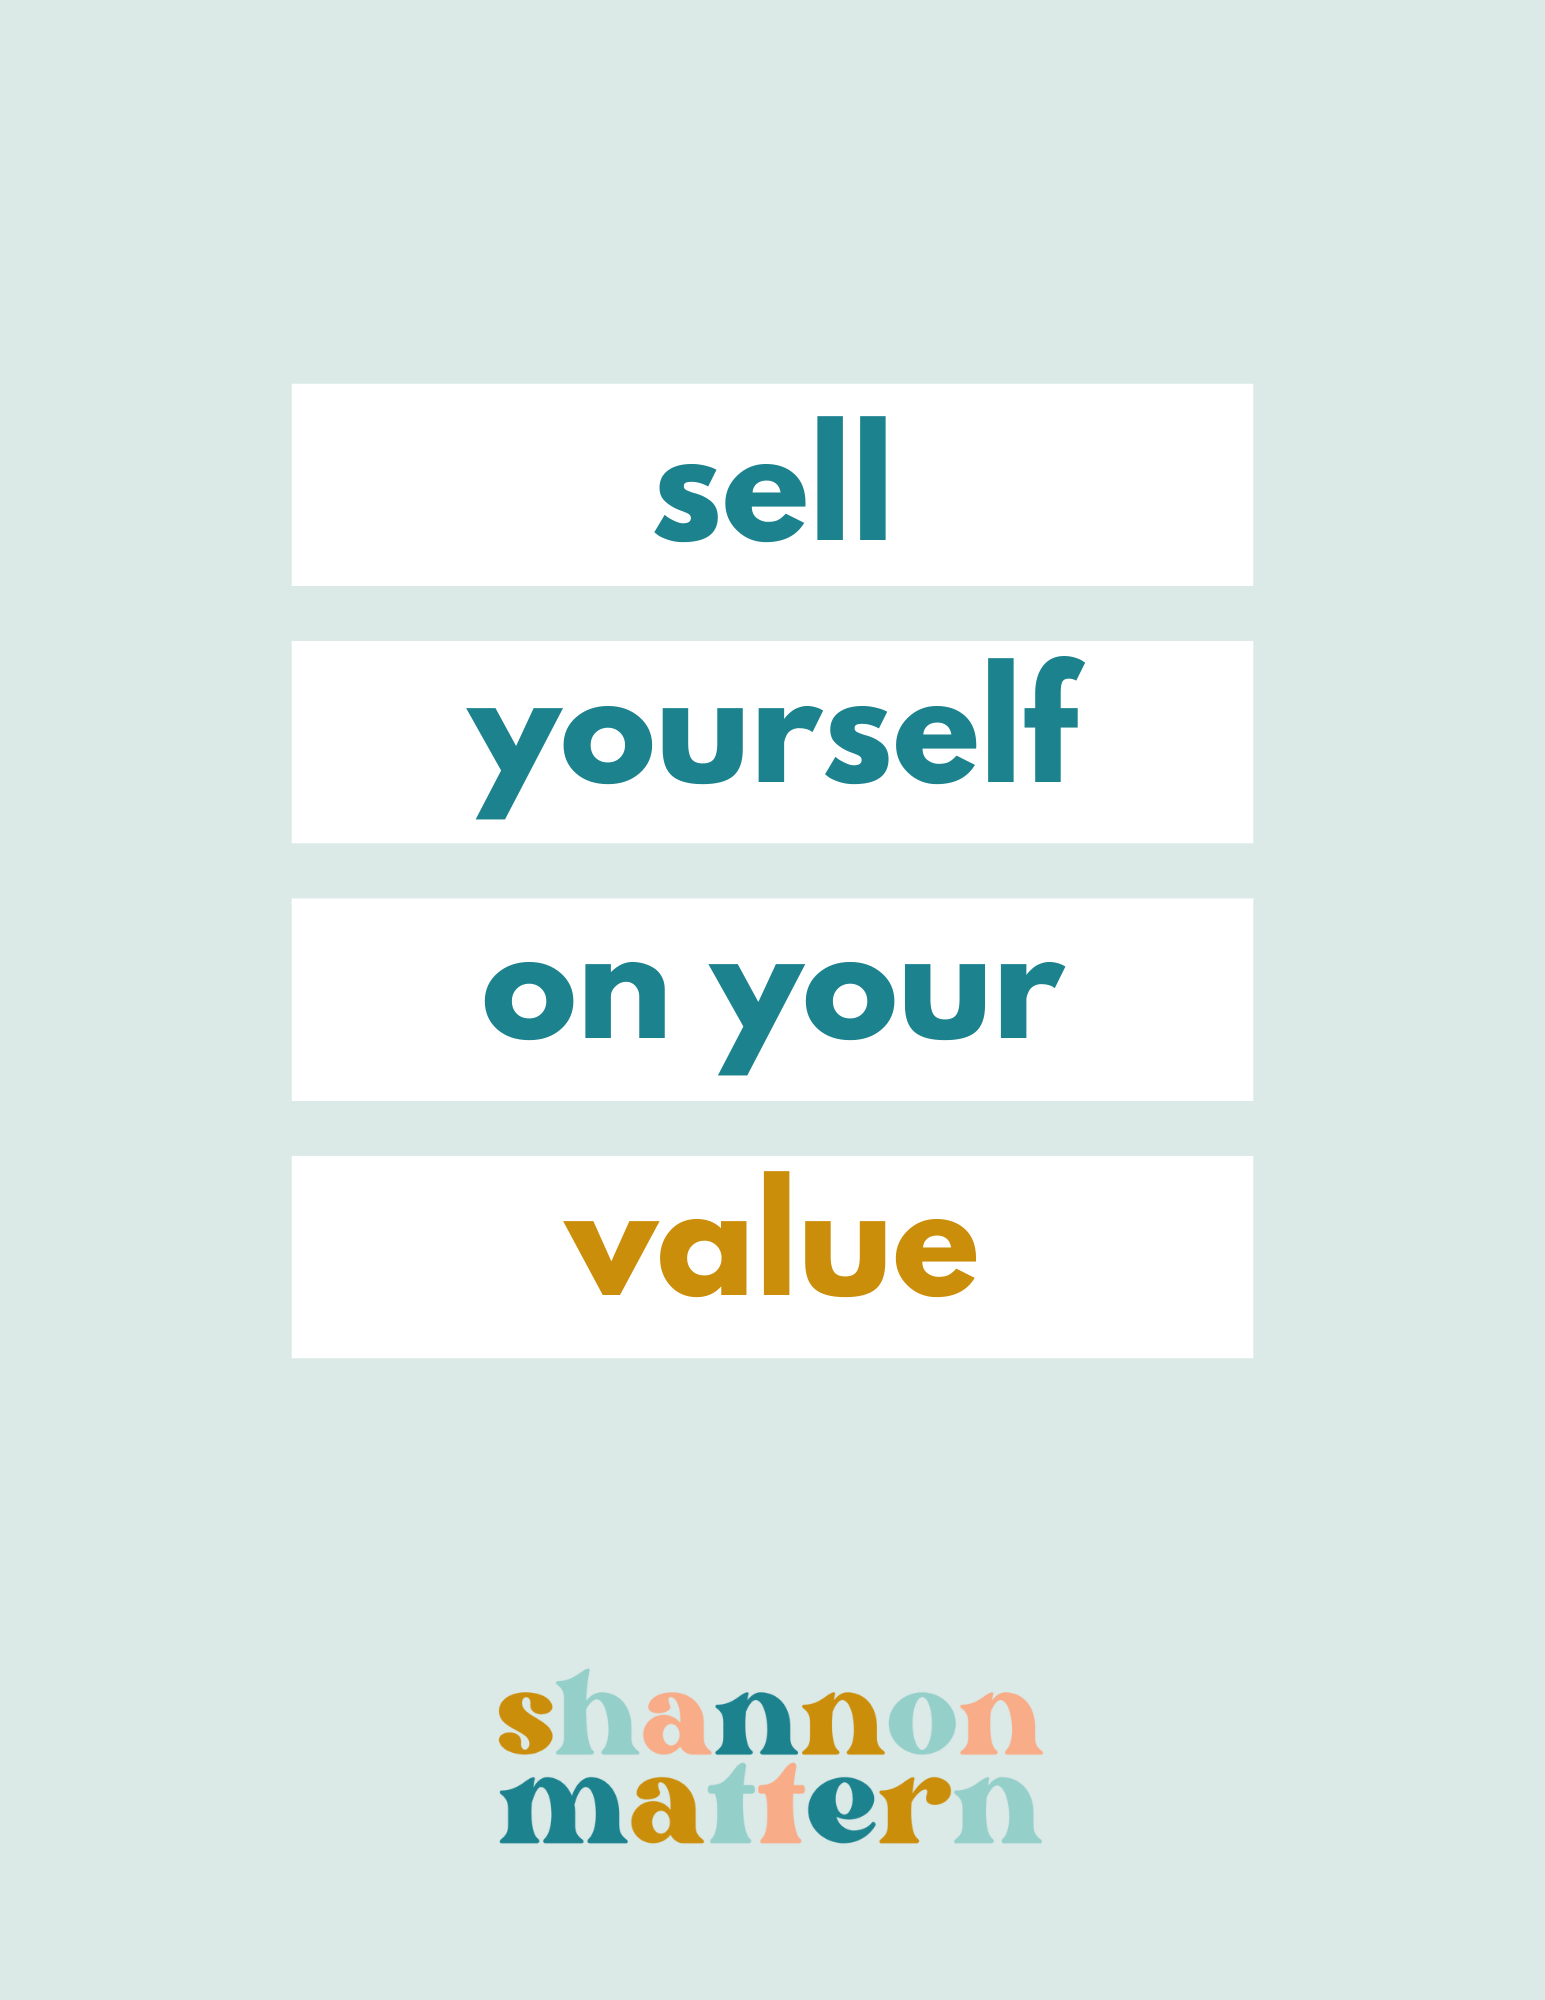 Shannon Mattern is demonstrating how to effectively market oneself by highlighting their unique value. Full Text: sell yourself on your value shannon mattern